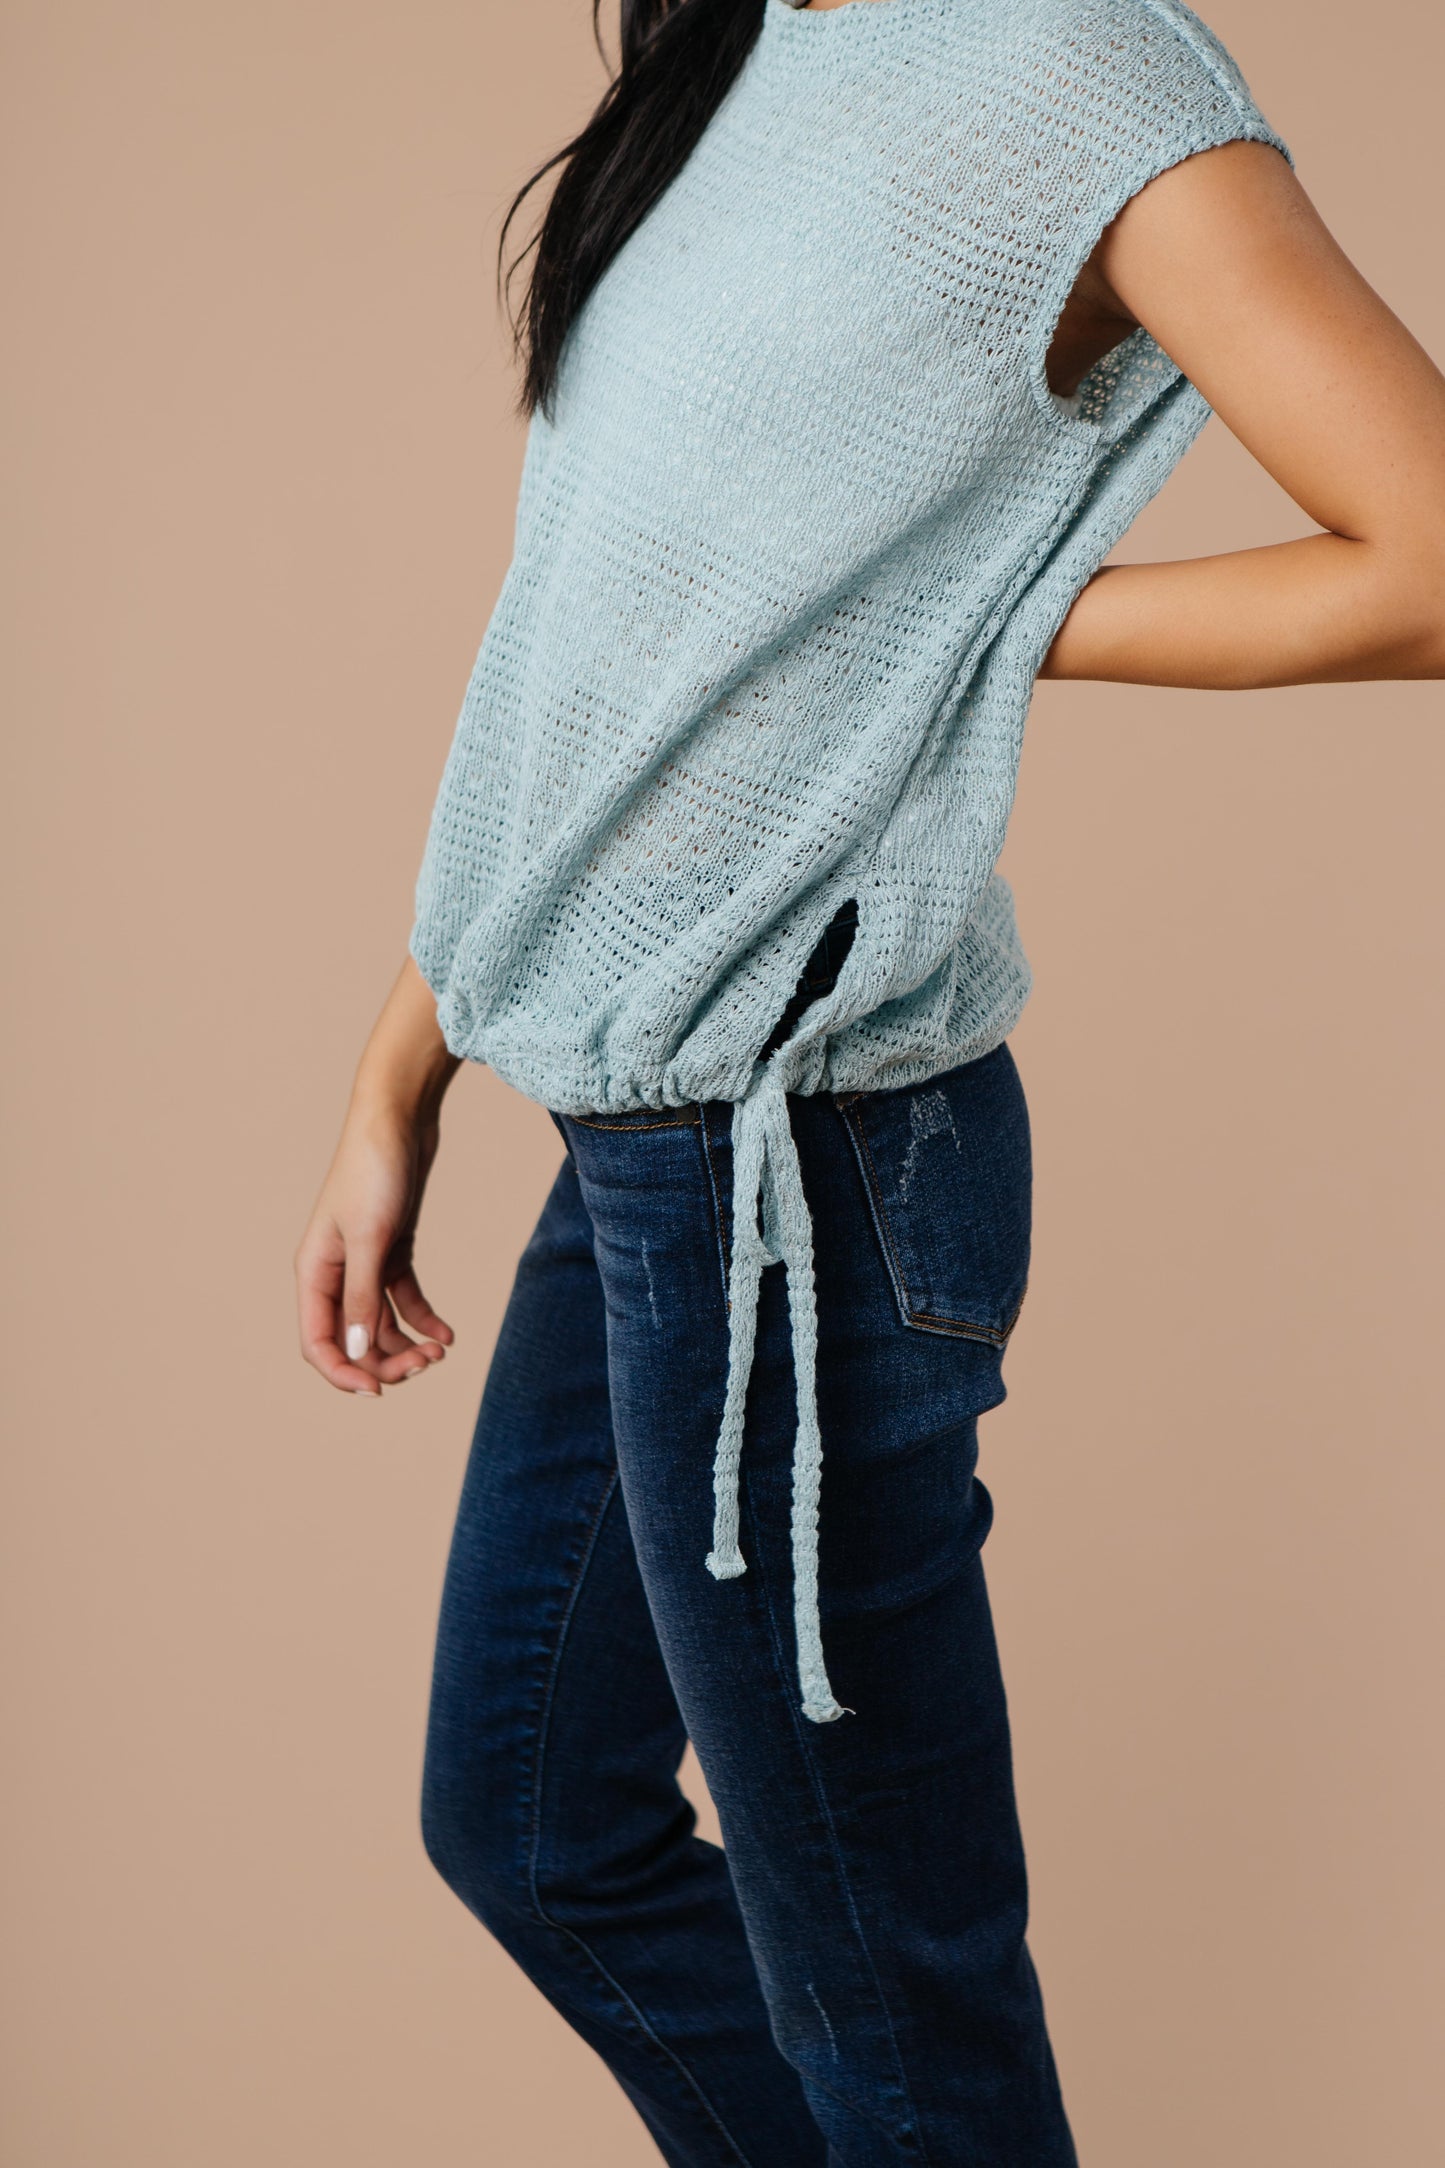 Girls Don't Sweat Sweater In Antique Blue